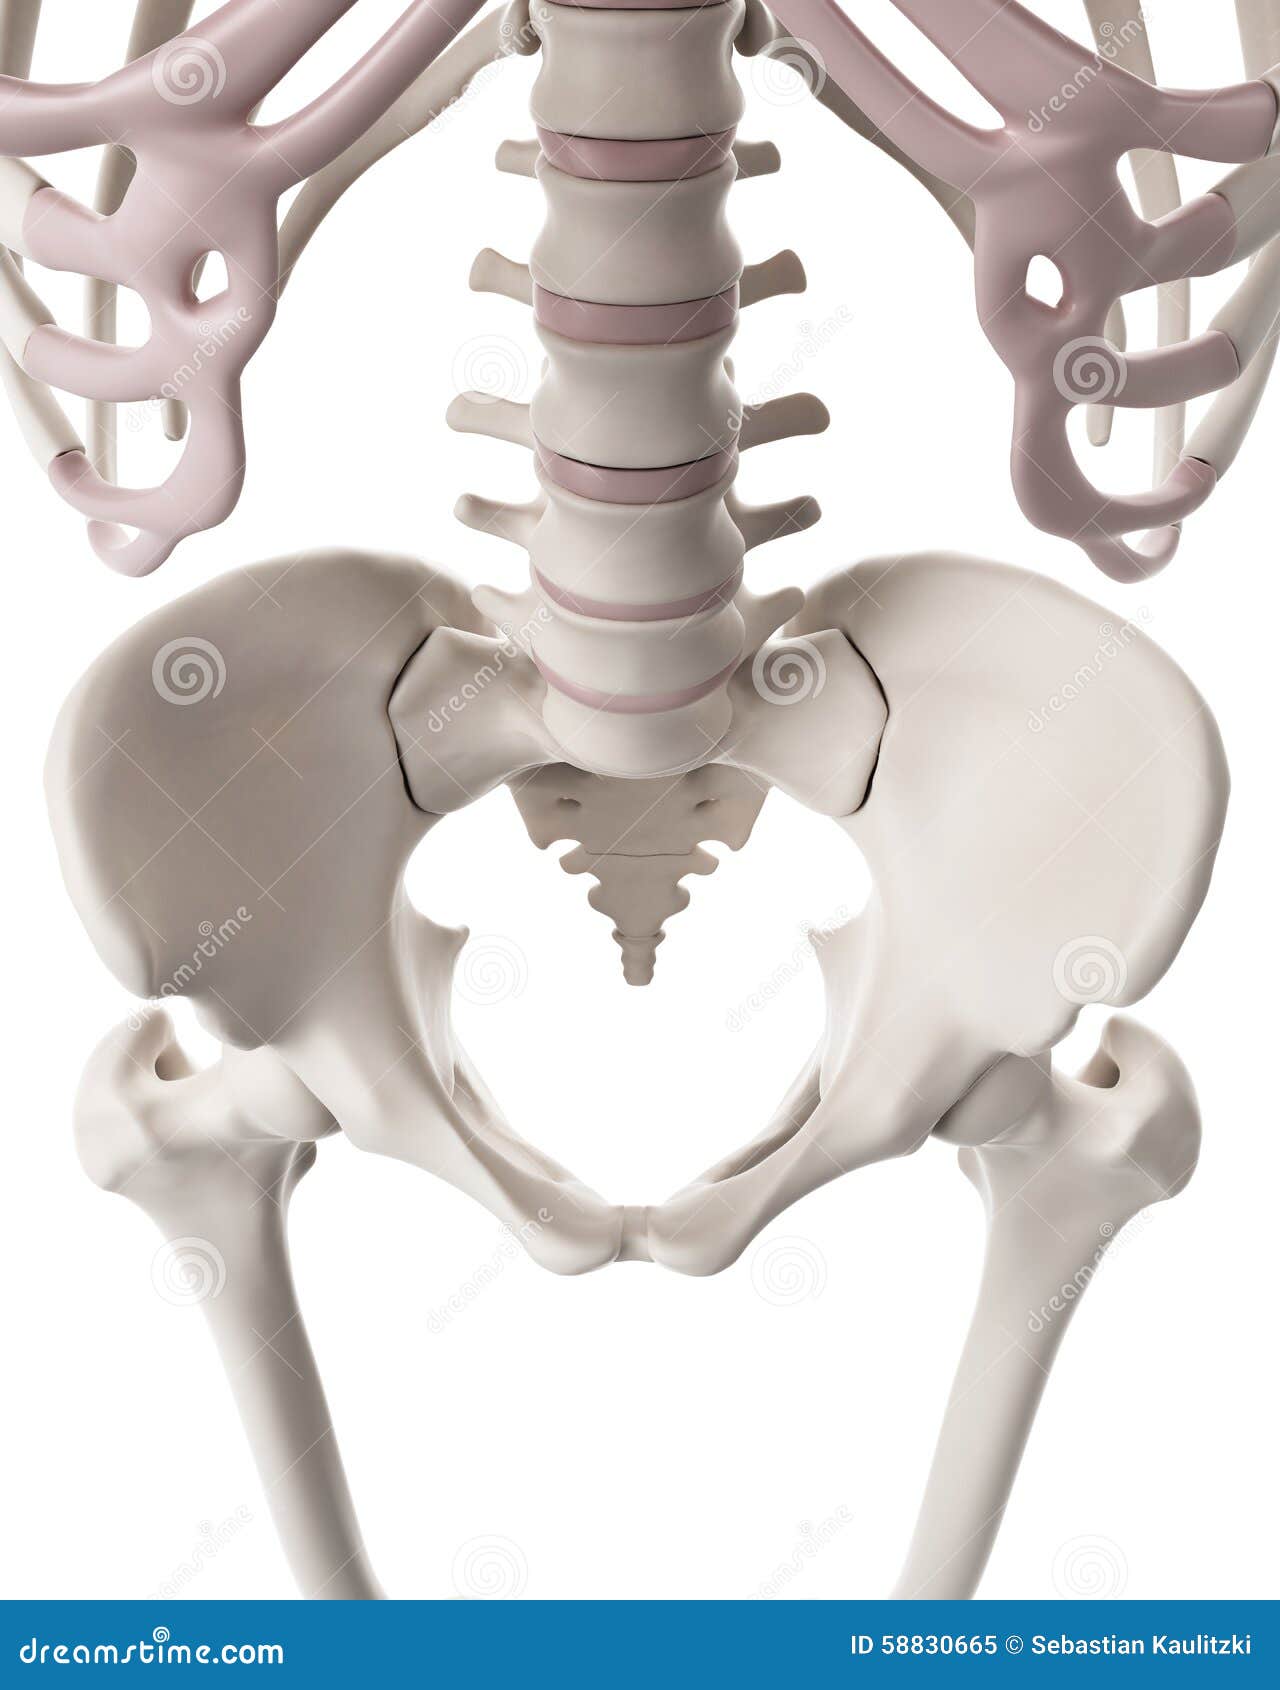 Anatomy Pictures Of Lower Back And Hip Soma System® Releasing